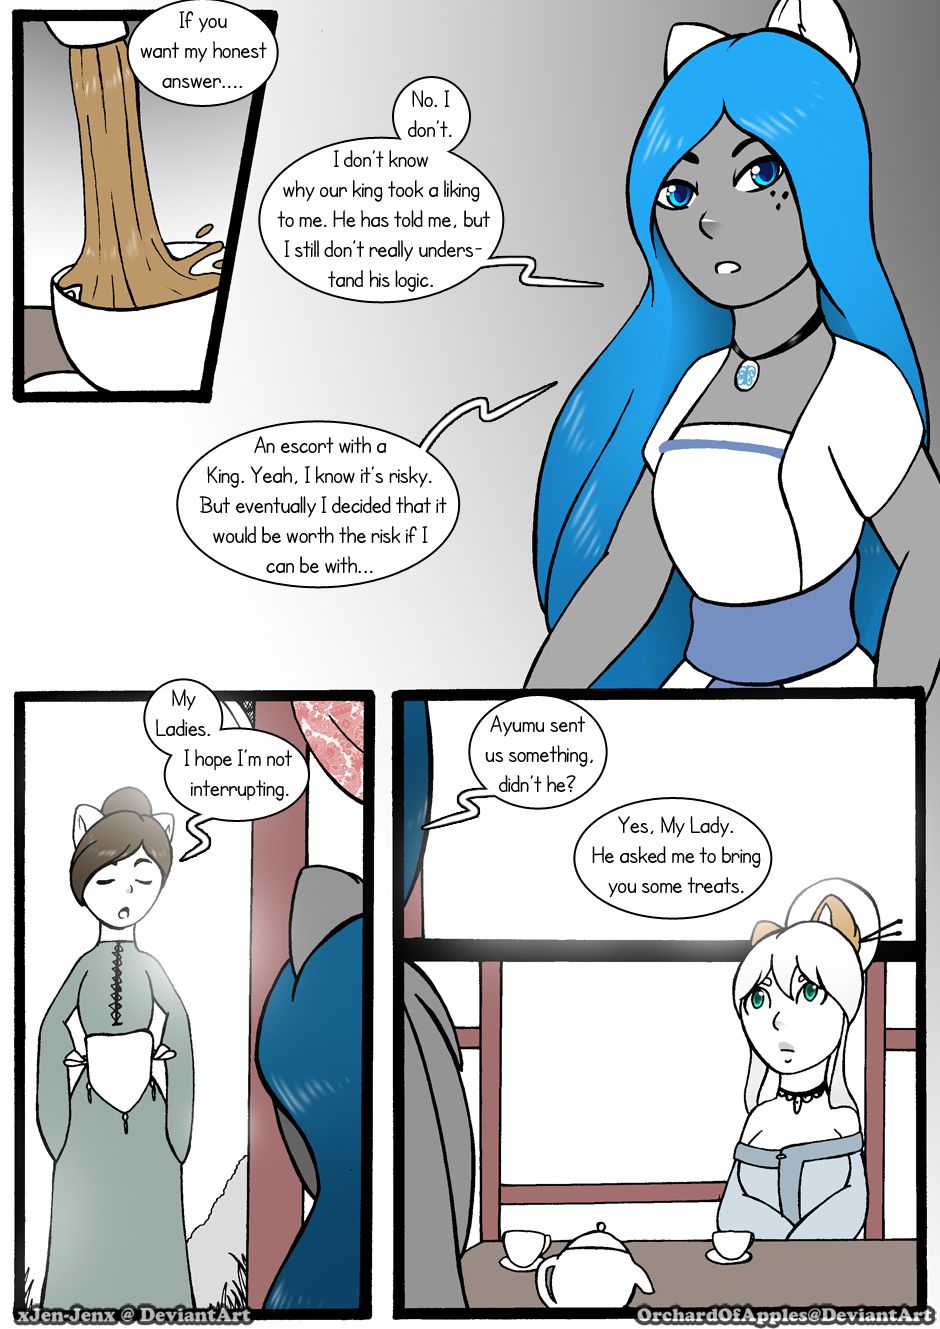 [Jeny-jen94] Between Kings and Queens [Ongoing] 217